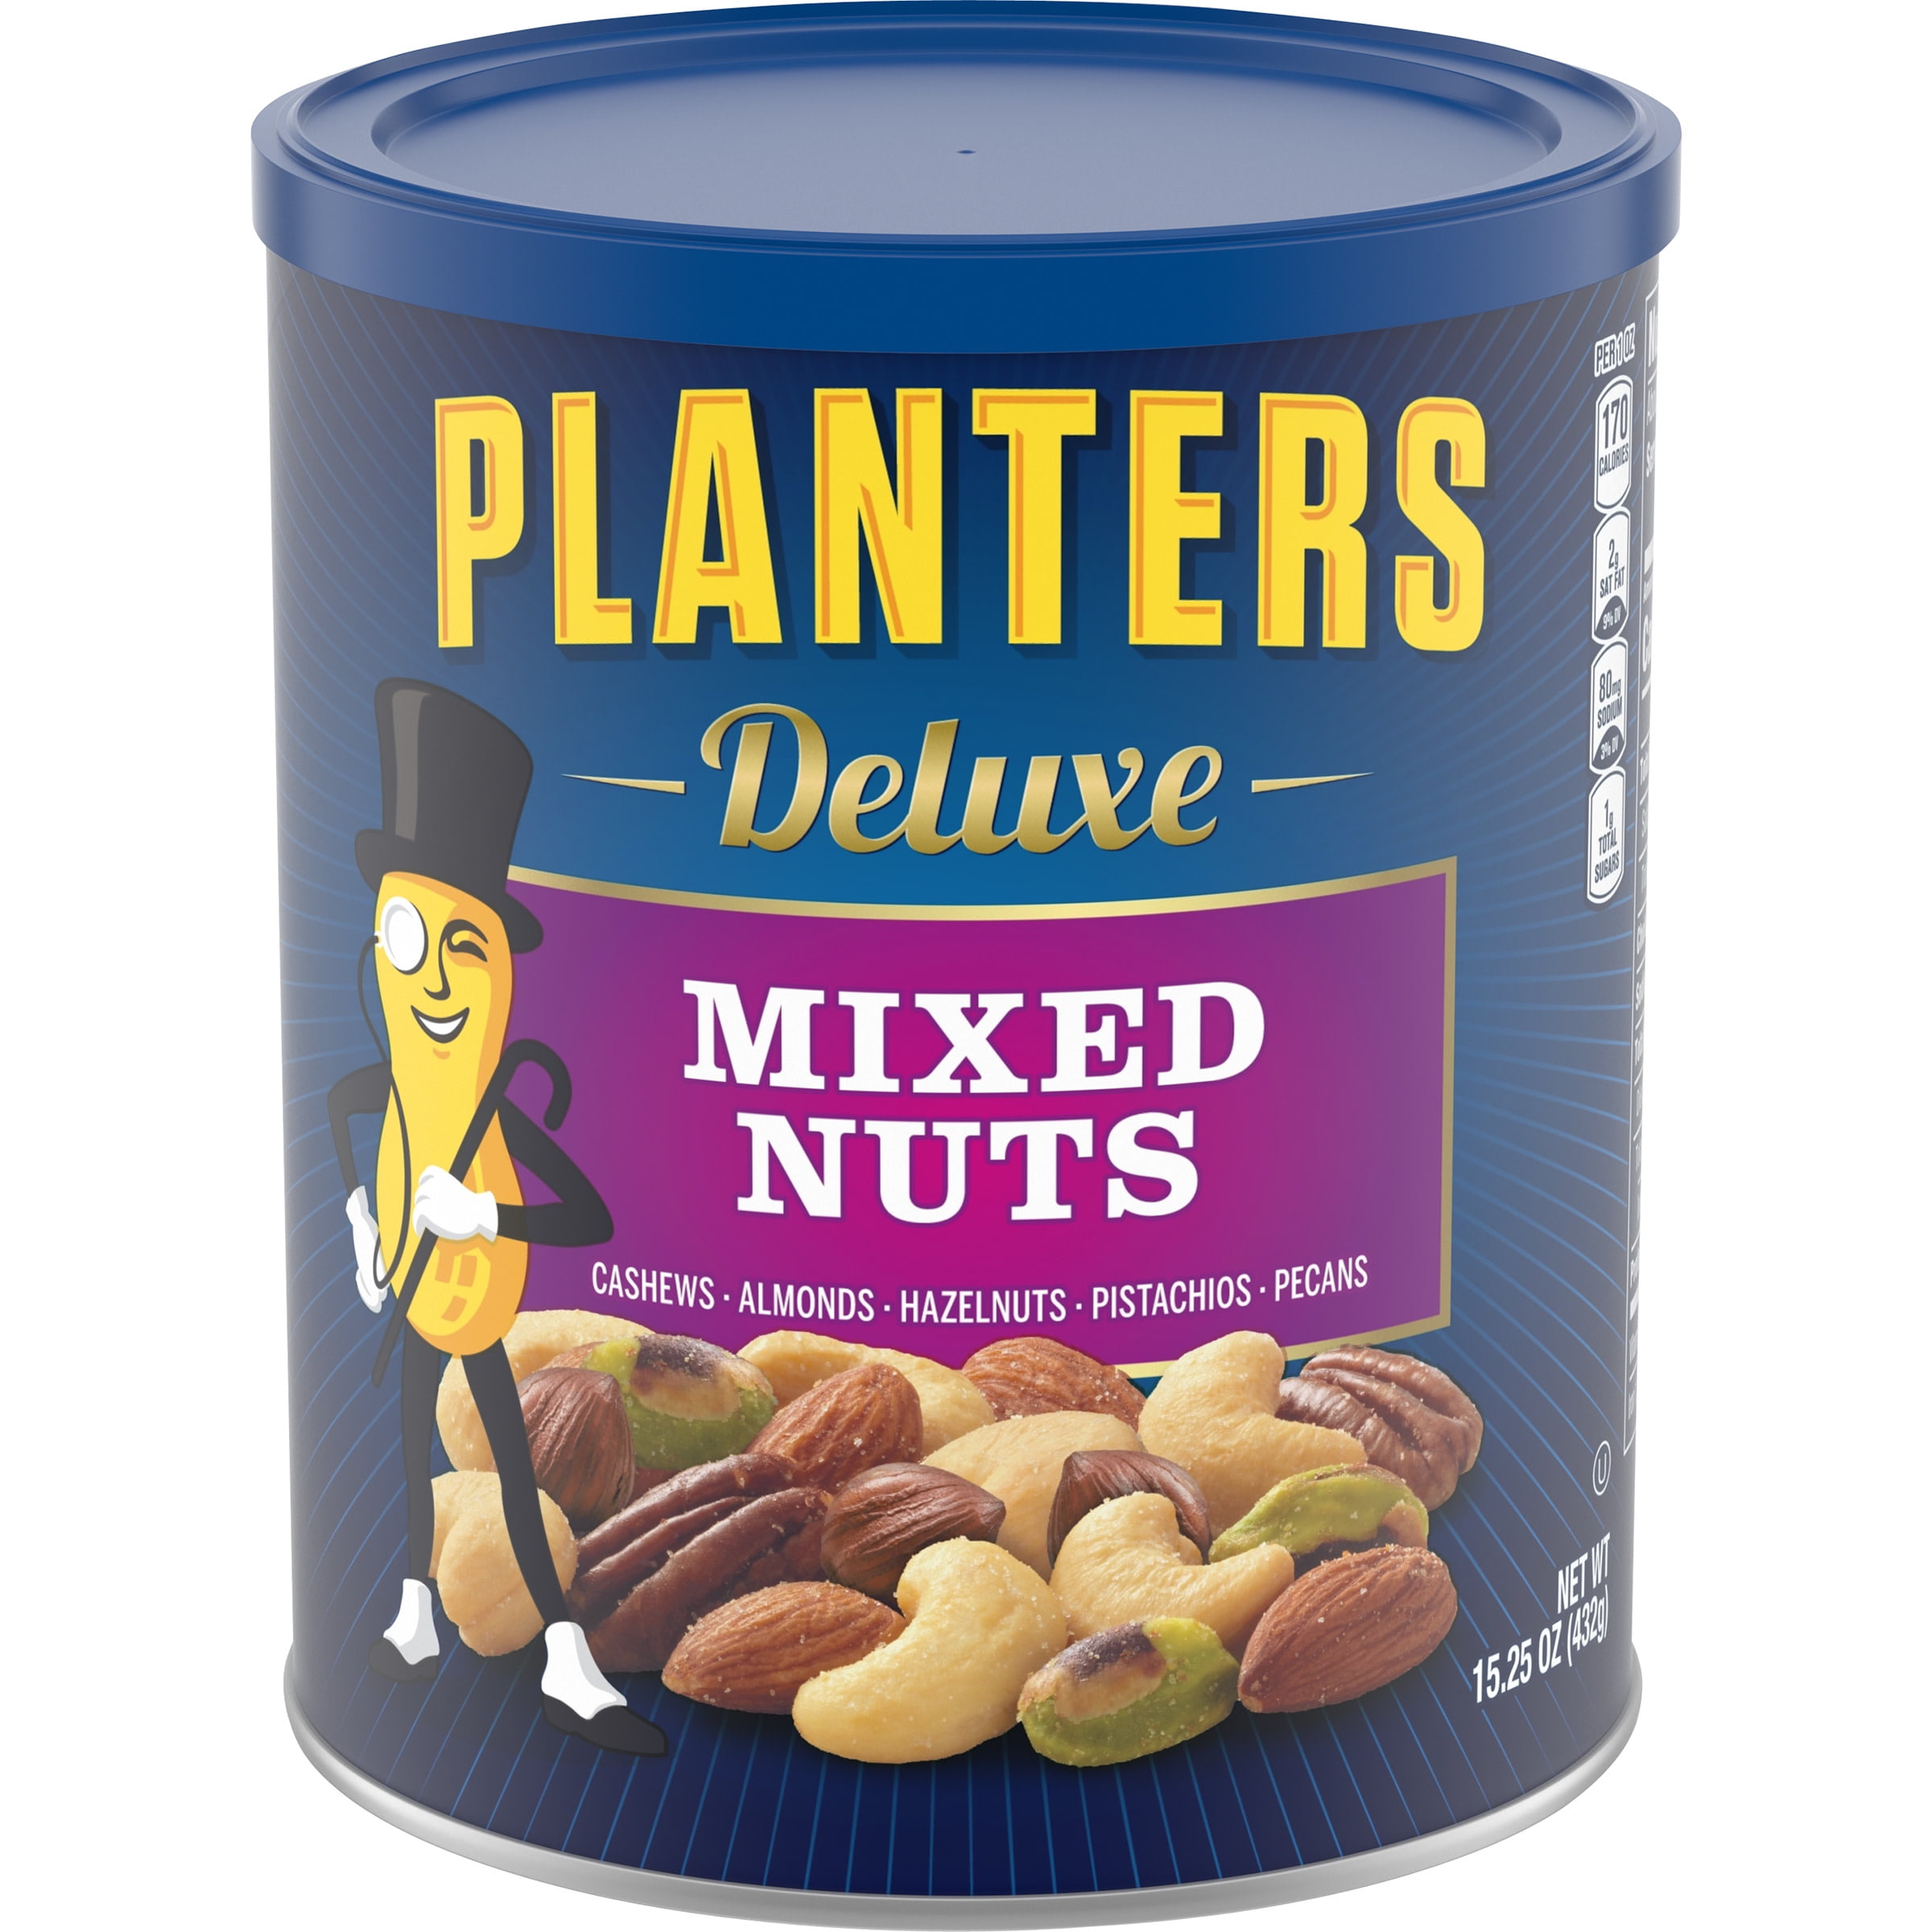 Planters Deluxe Mixed Nuts with Cashews, Almonds, Hazelnuts, Pistachios & Pecans, 15.25 oz Canister